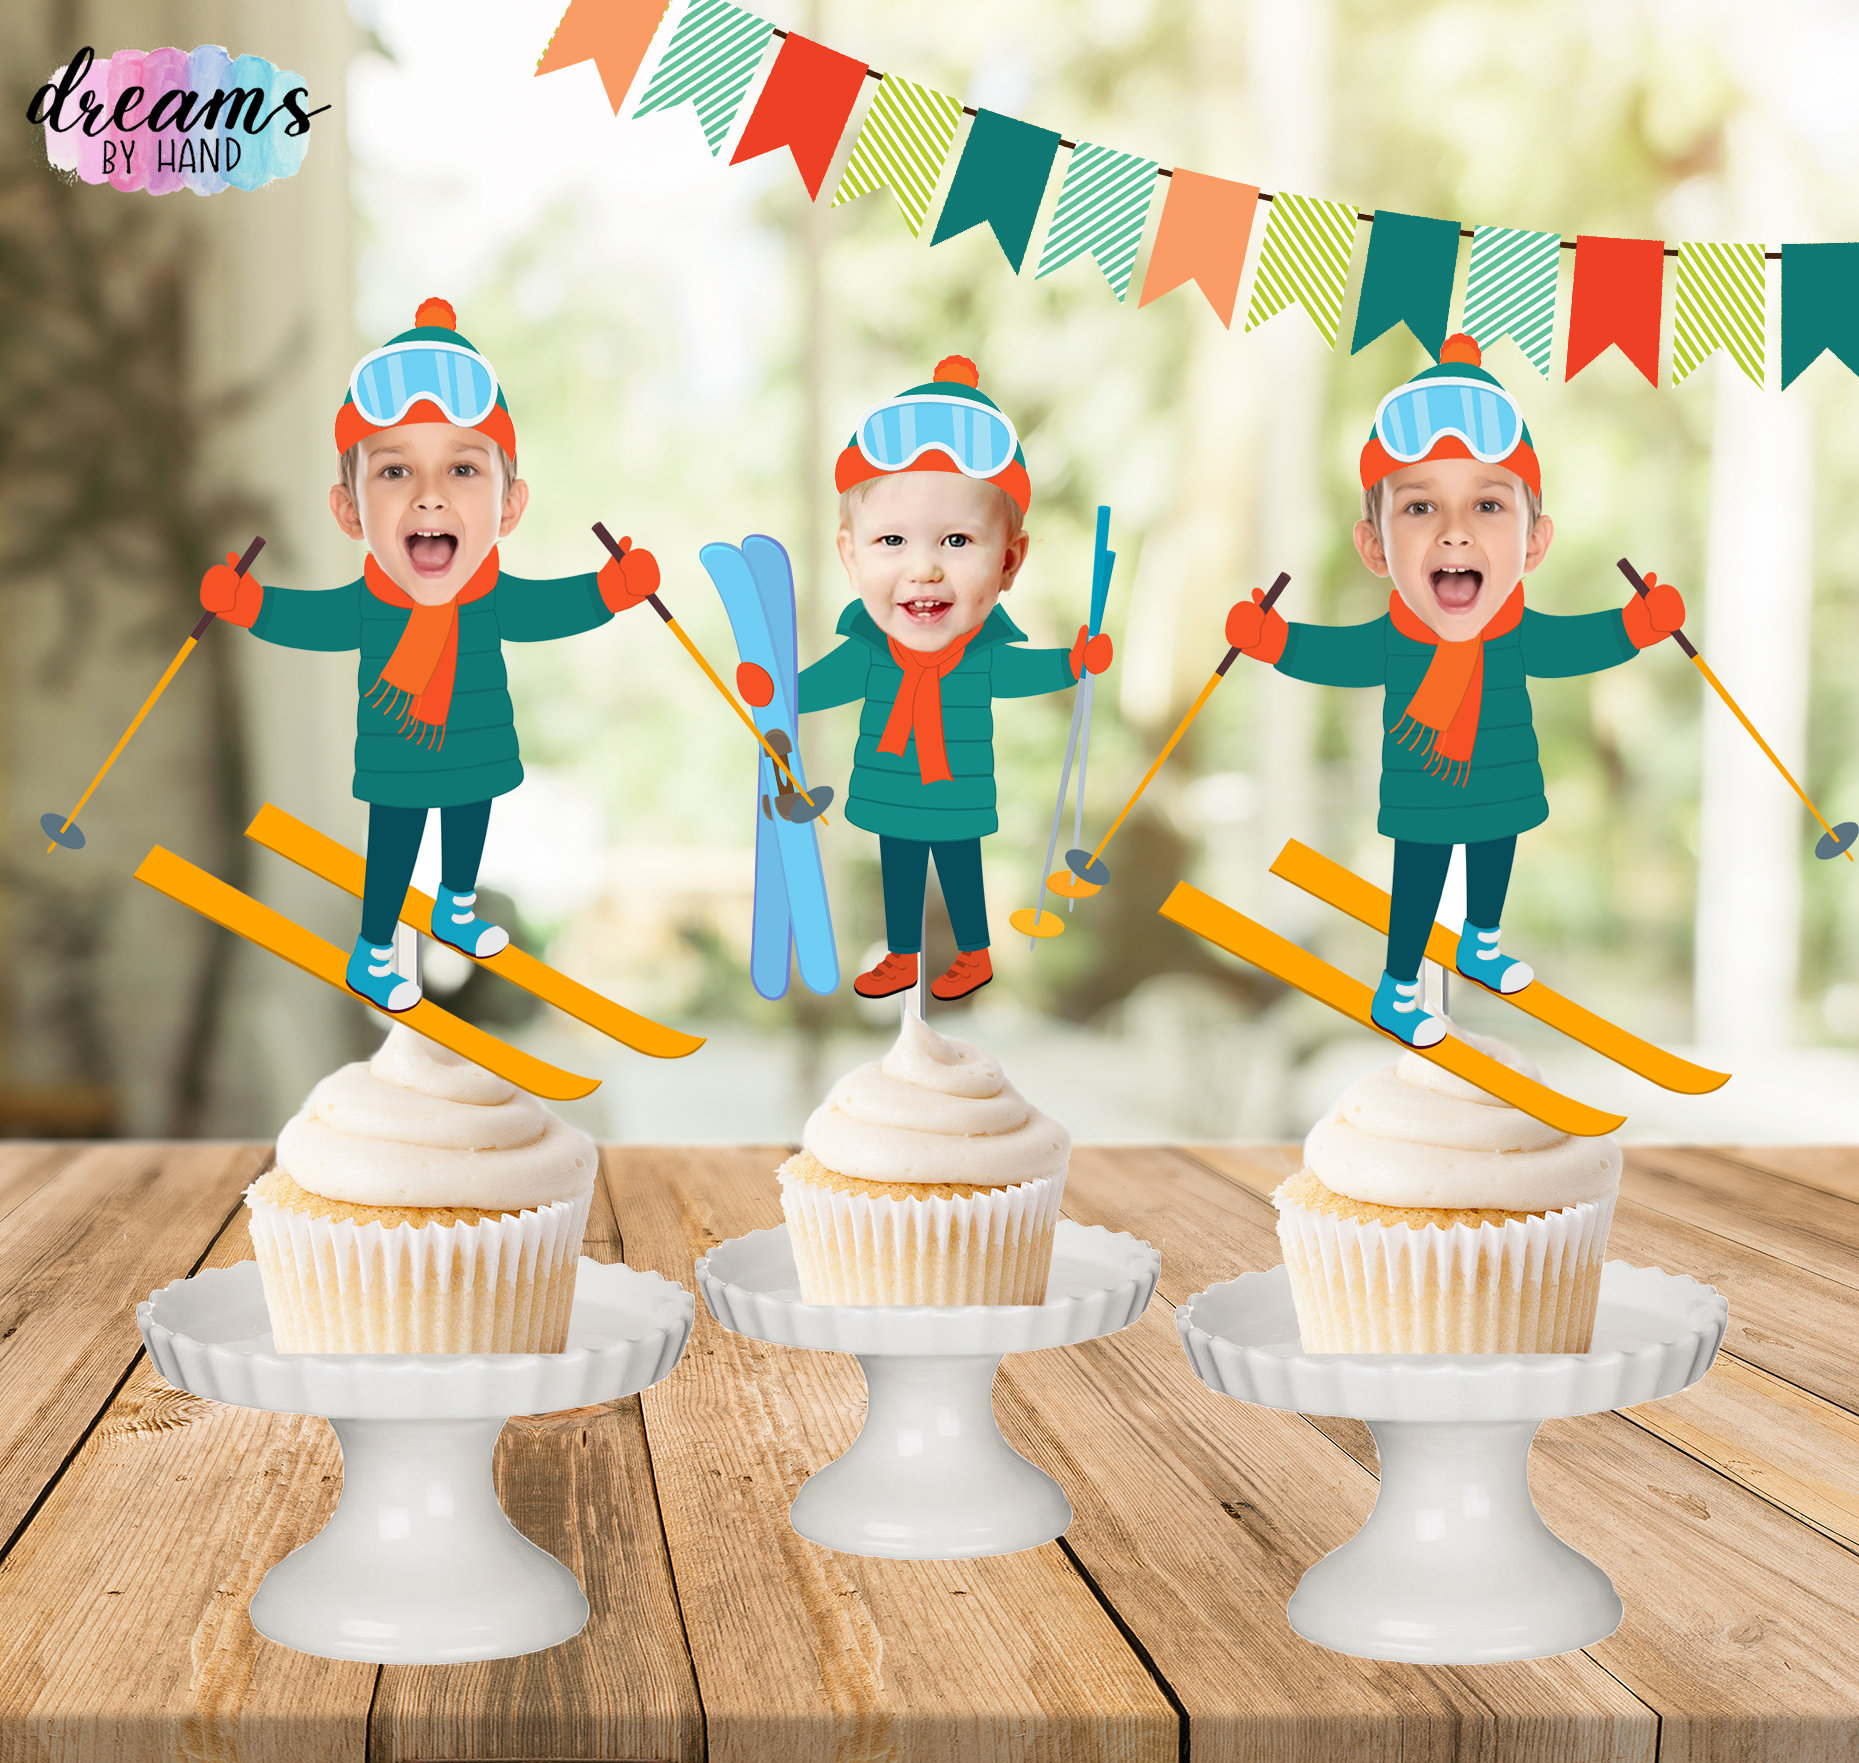 SKI Photo Cupcake Topper, Skiing Face Cupcake Toppers, Boys Party